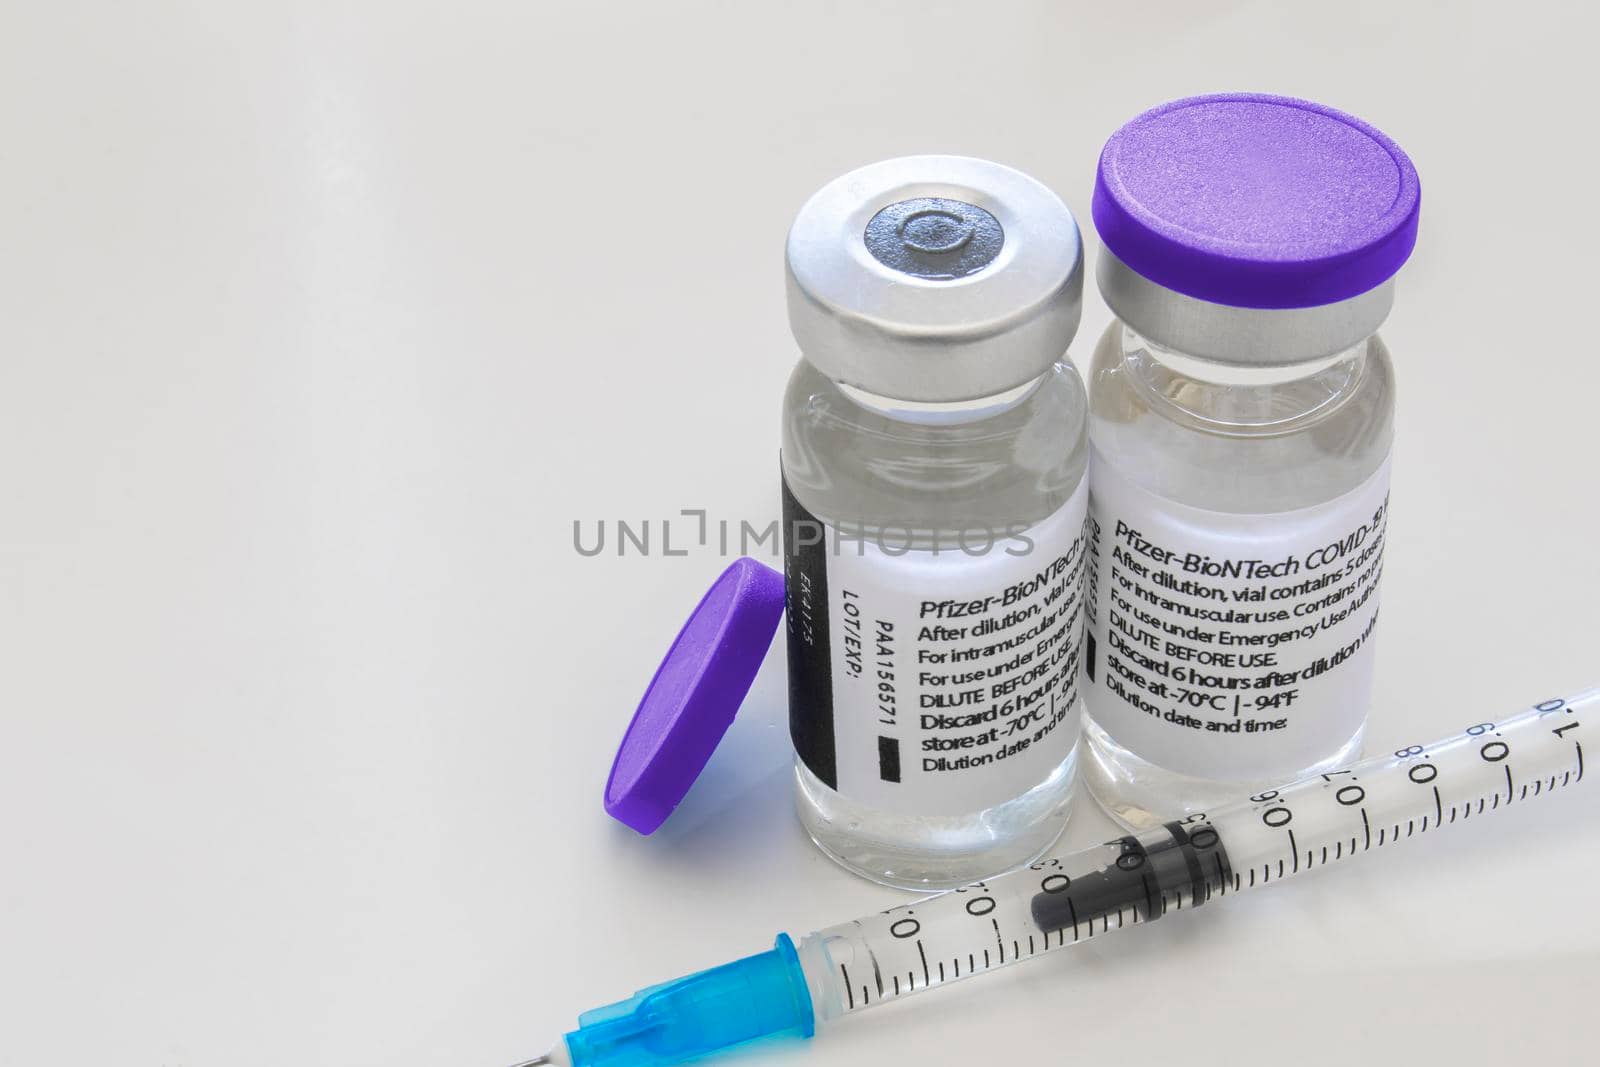 Calgary, Alberta, Canada. April 16, 2021. A couple of Pfizer Covid-19 vaccine vials bottles and an injection syringe on a clear table.